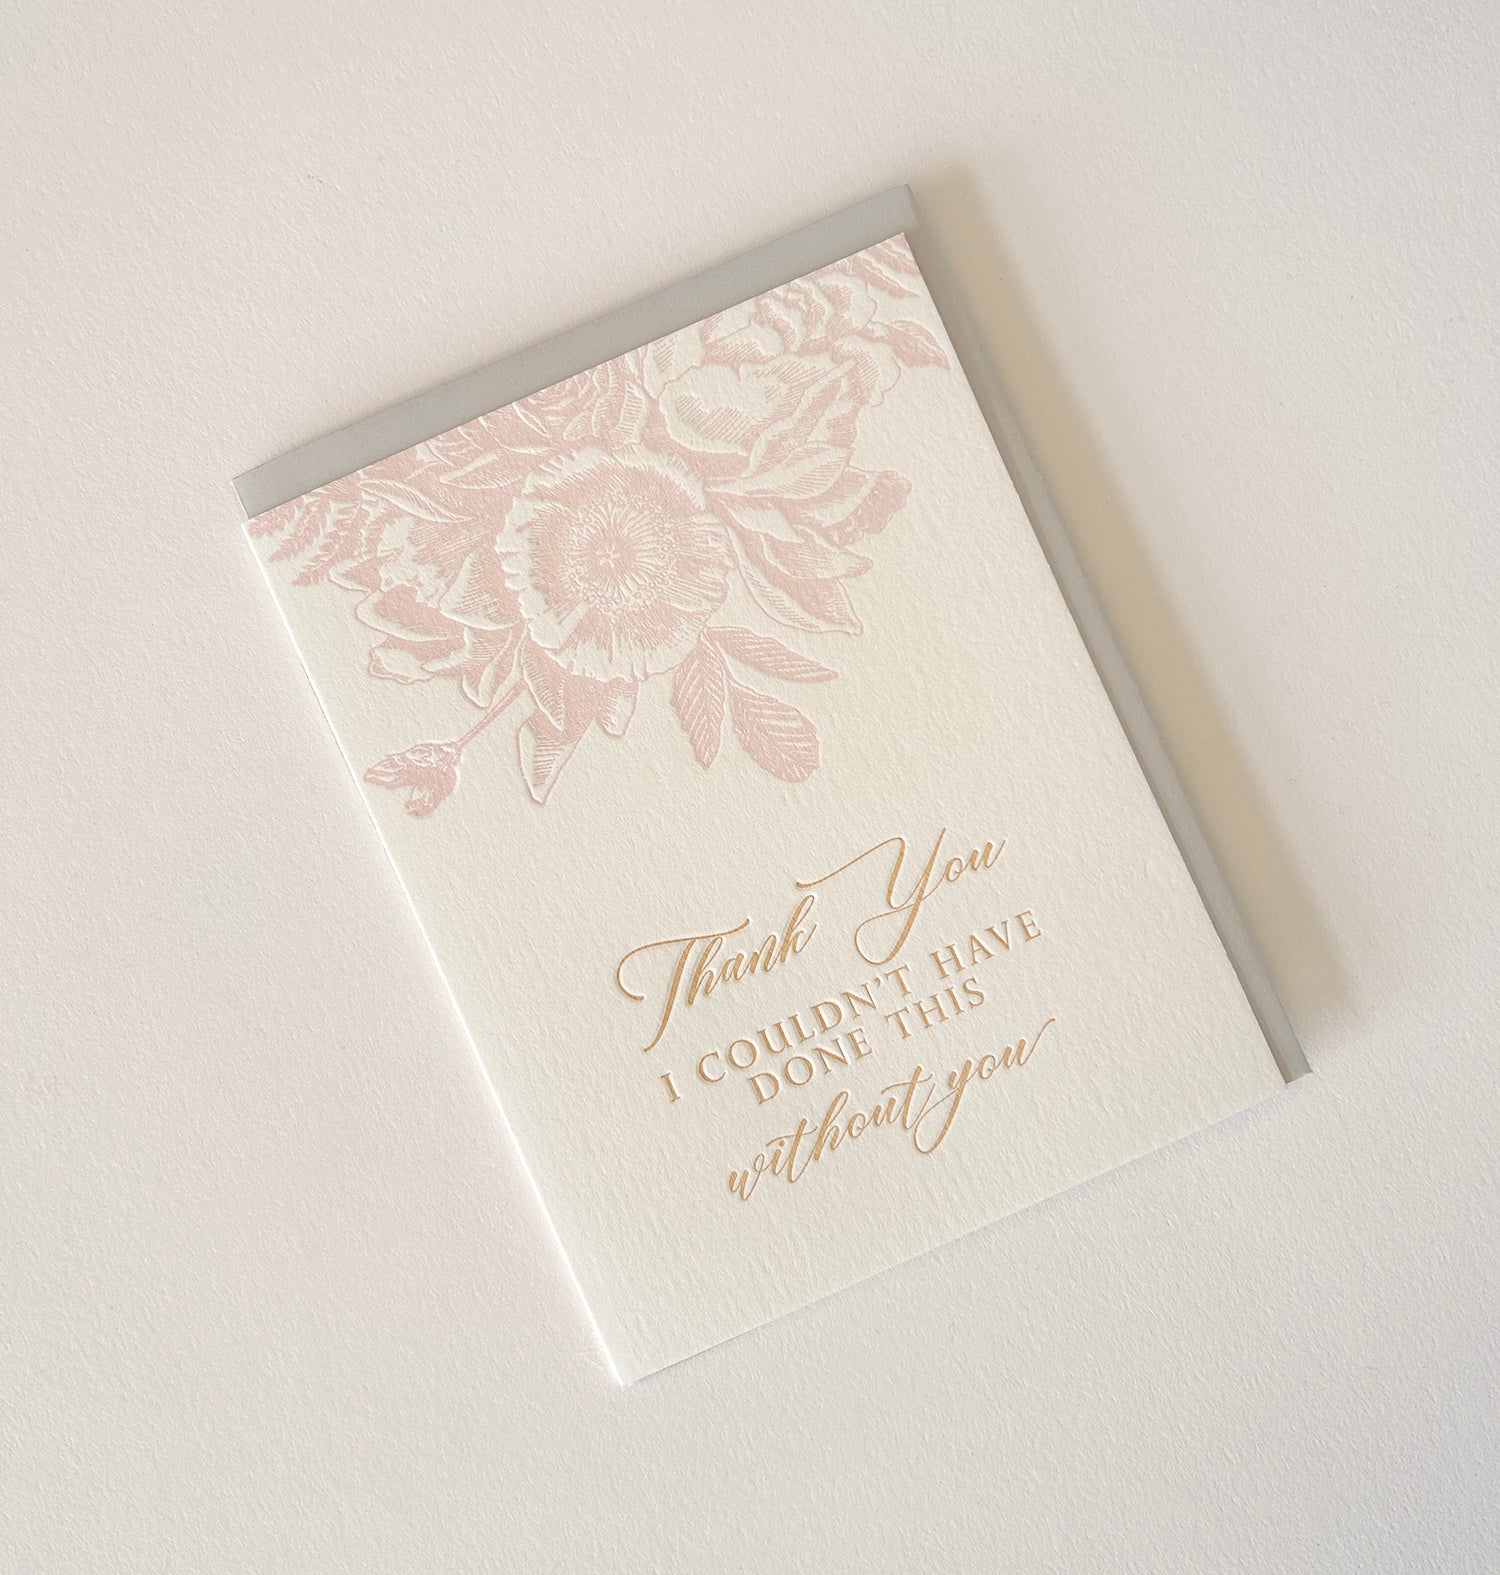 Letterpress thank you card with florals that says "Thank you I couldn't have done this without you" by Rust Belt Love